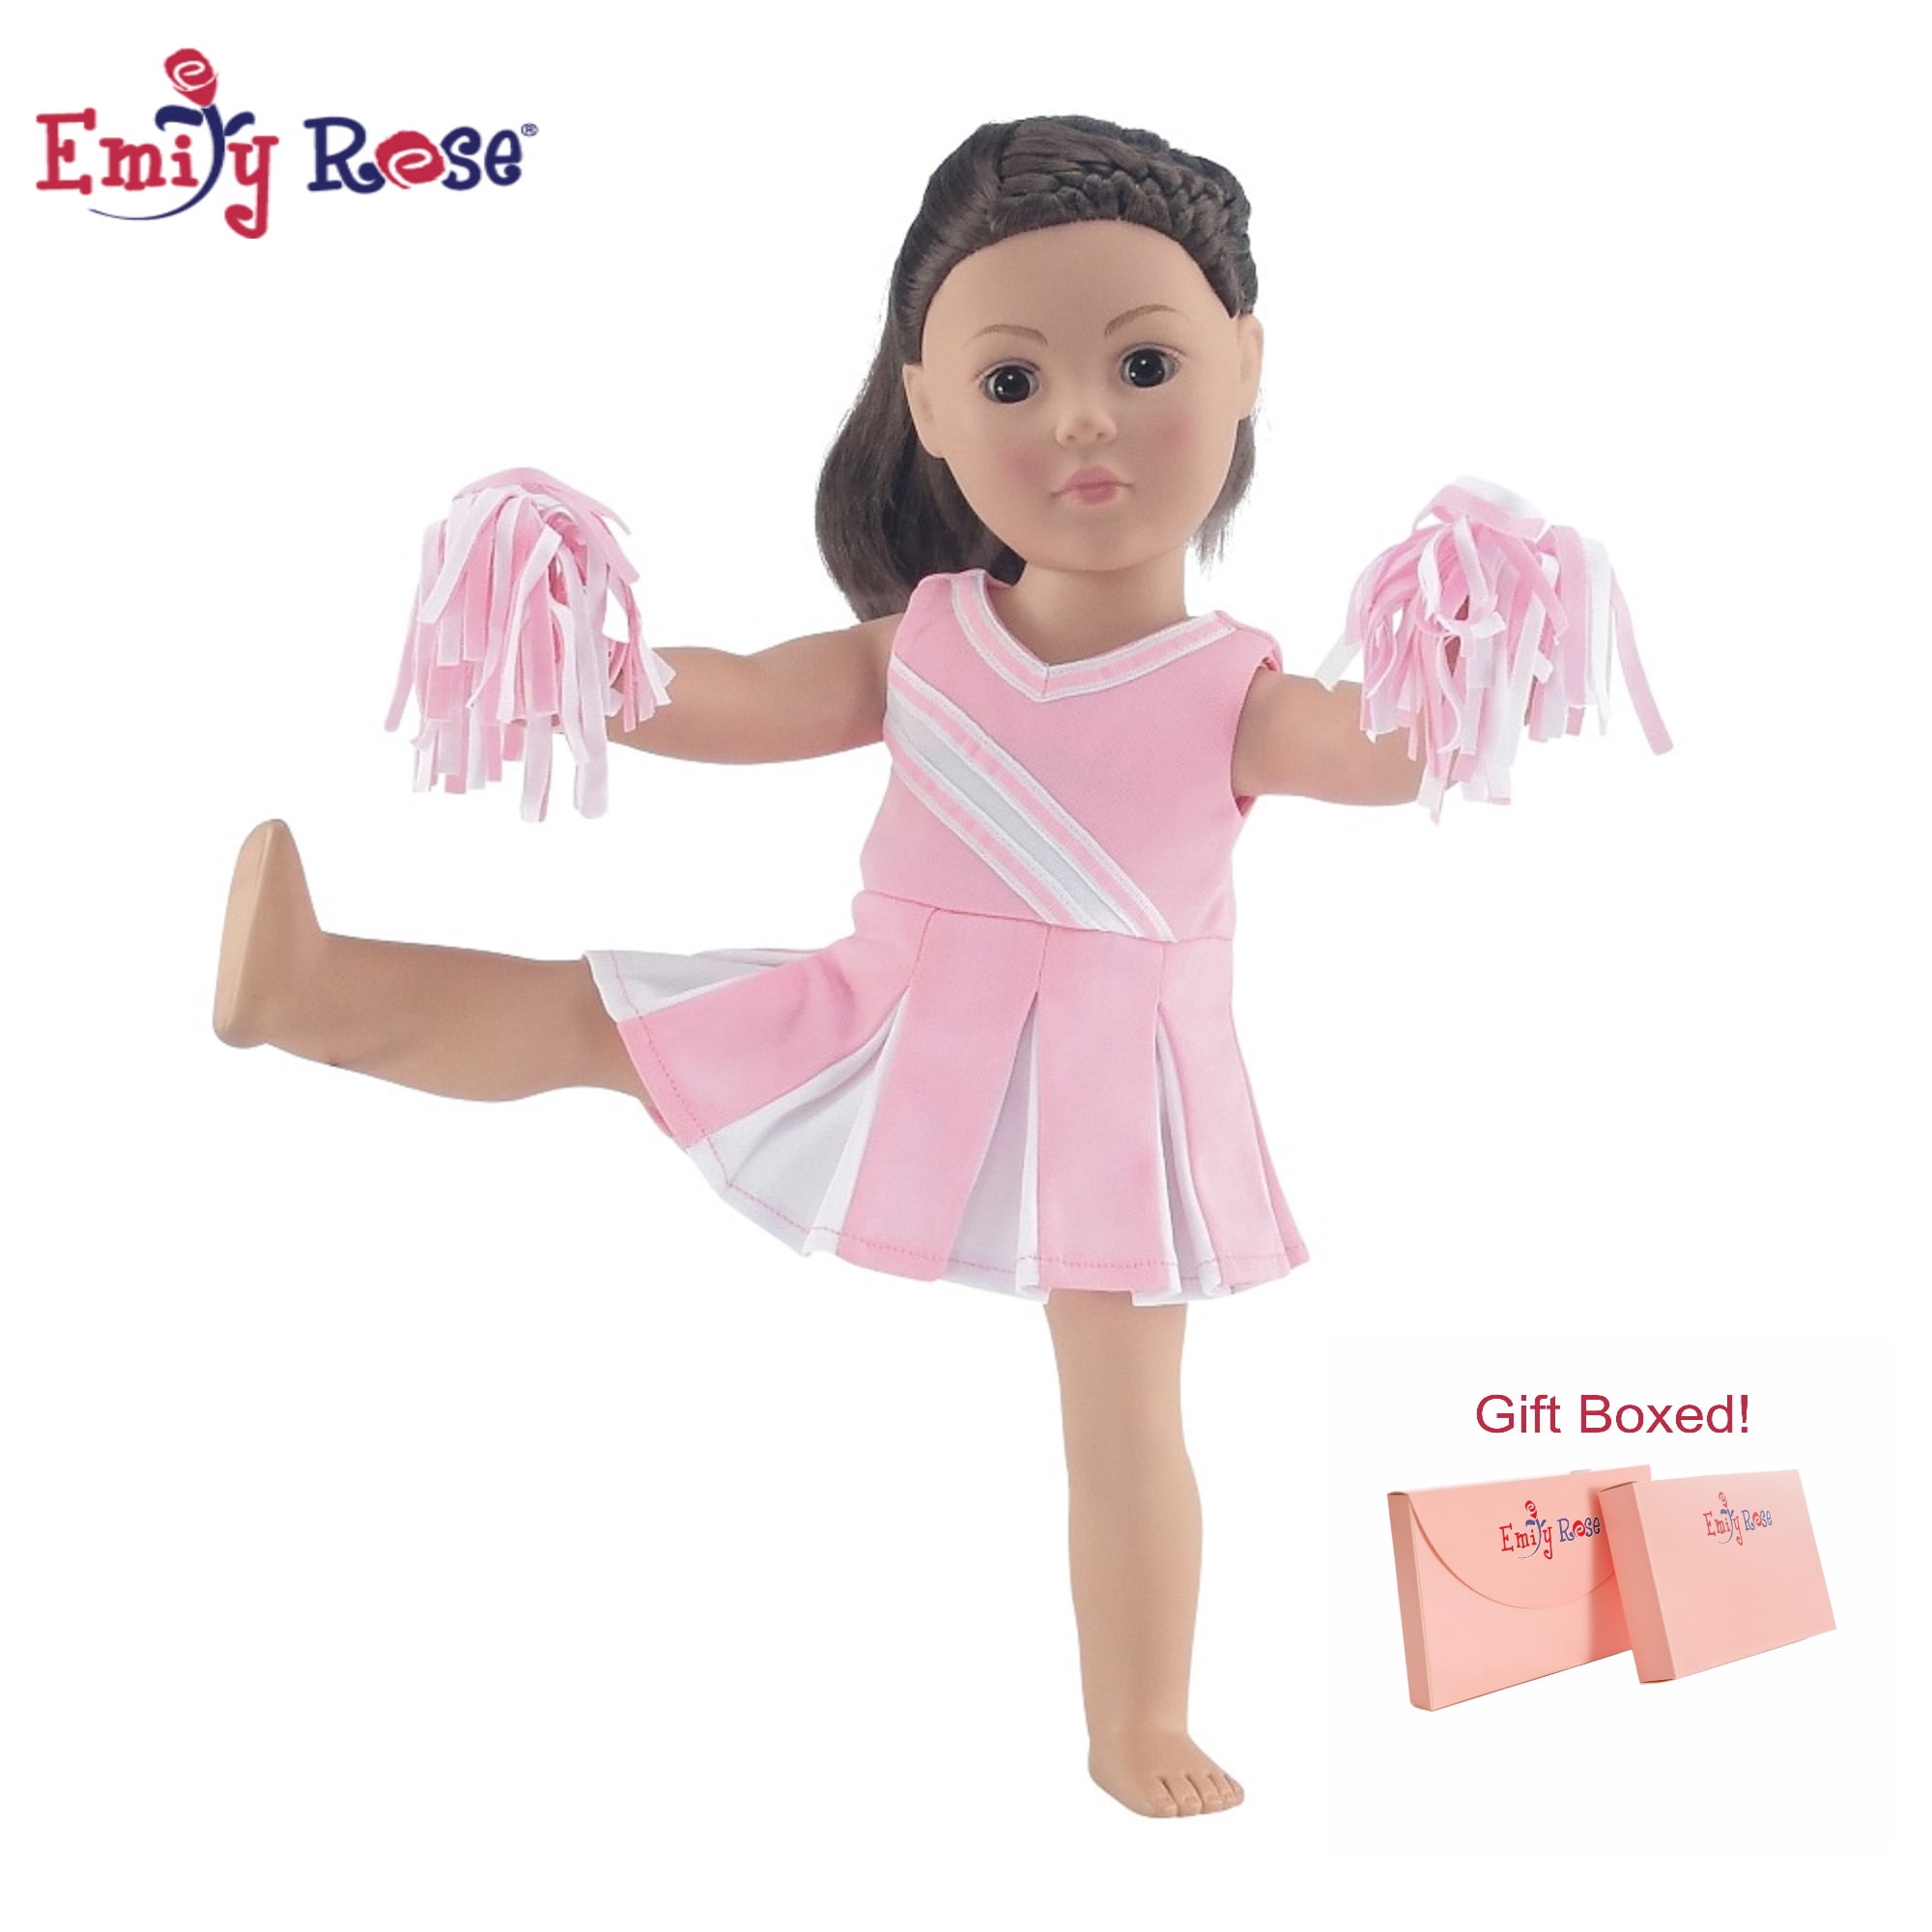 Doll Cheerleader Dress Outfit Set with Pom Poms Plus Megaphone Sophia's 18 Inch Doll Cheerleader Clothes by Sophias Fits American Girl Dolls